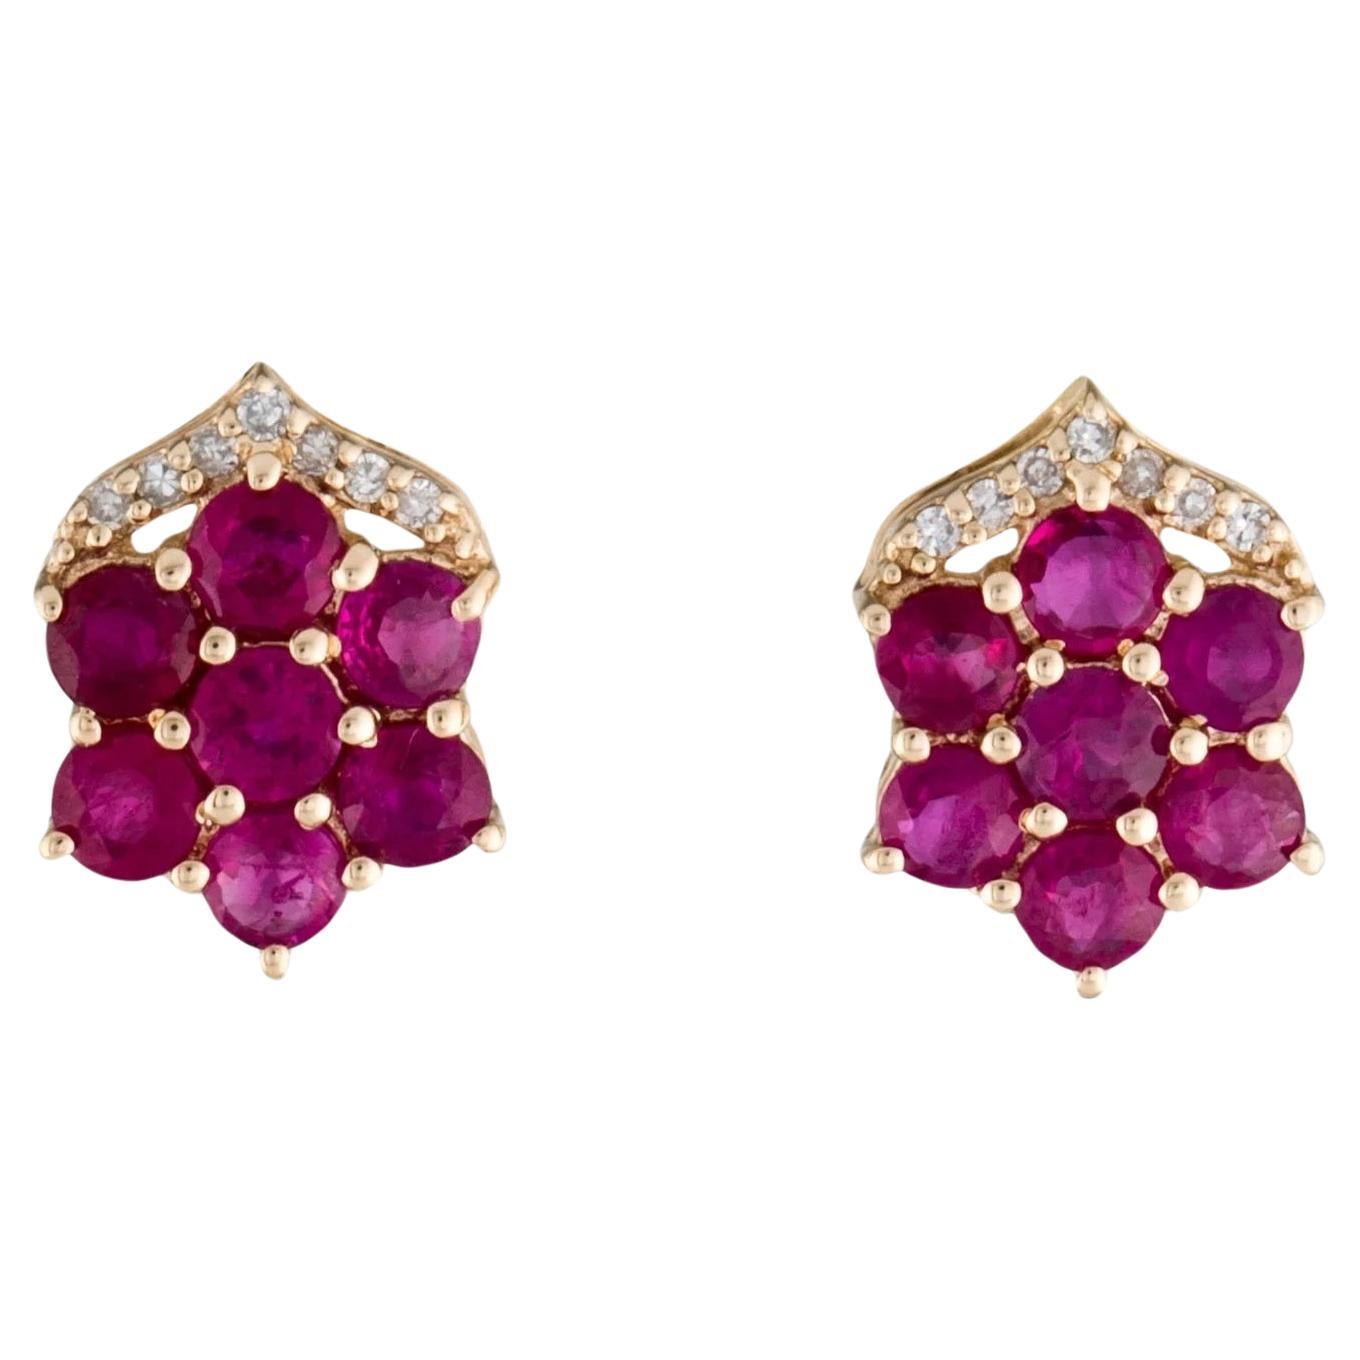  Well-Executed 14K Yellow Gold Ruby and Diamond Earrings